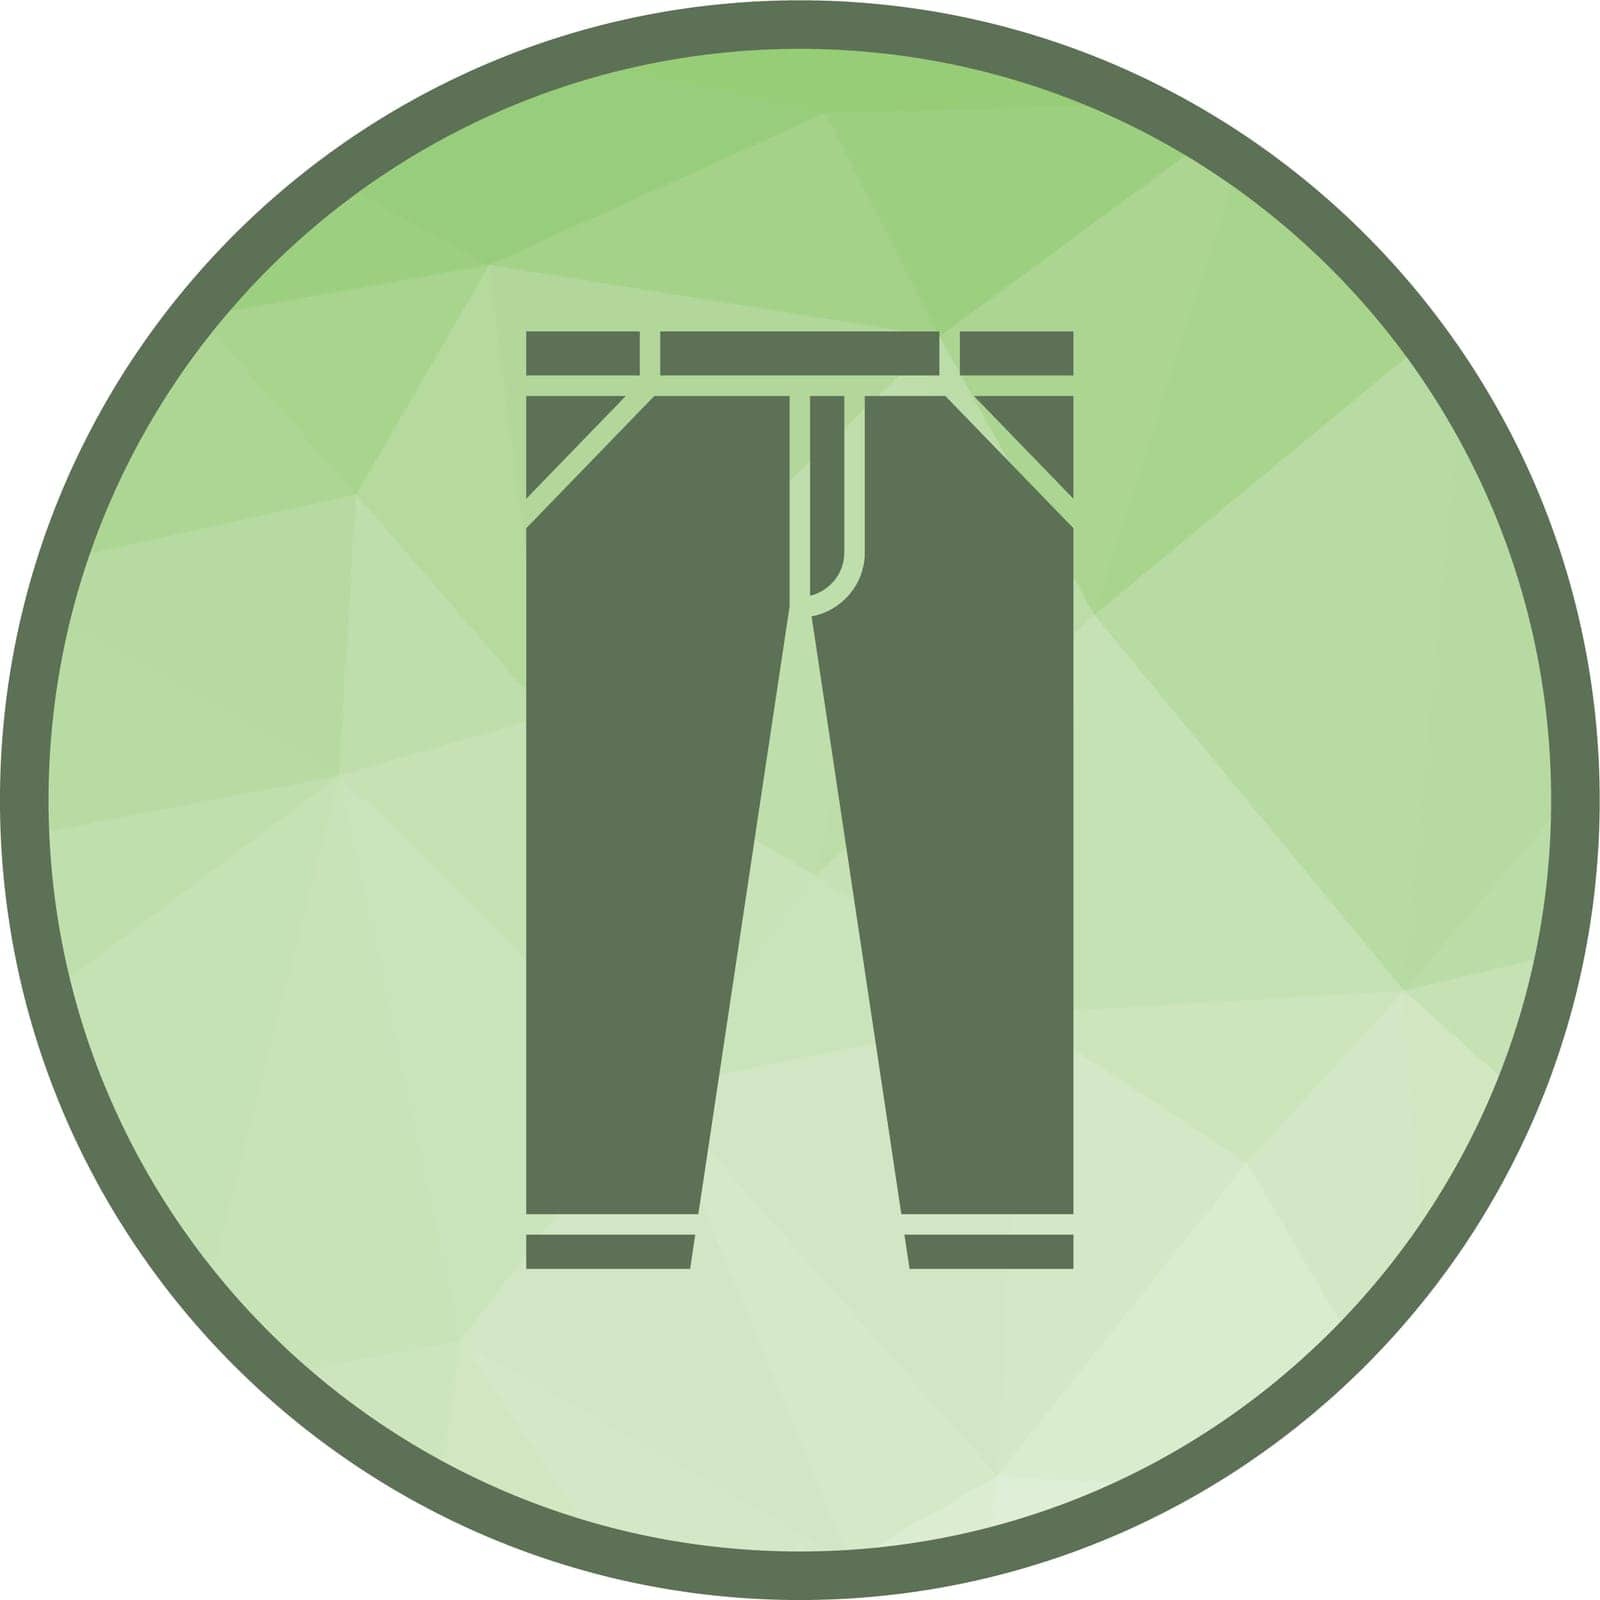 Pants icon vector image. Suitable for mobile application web application and print media.